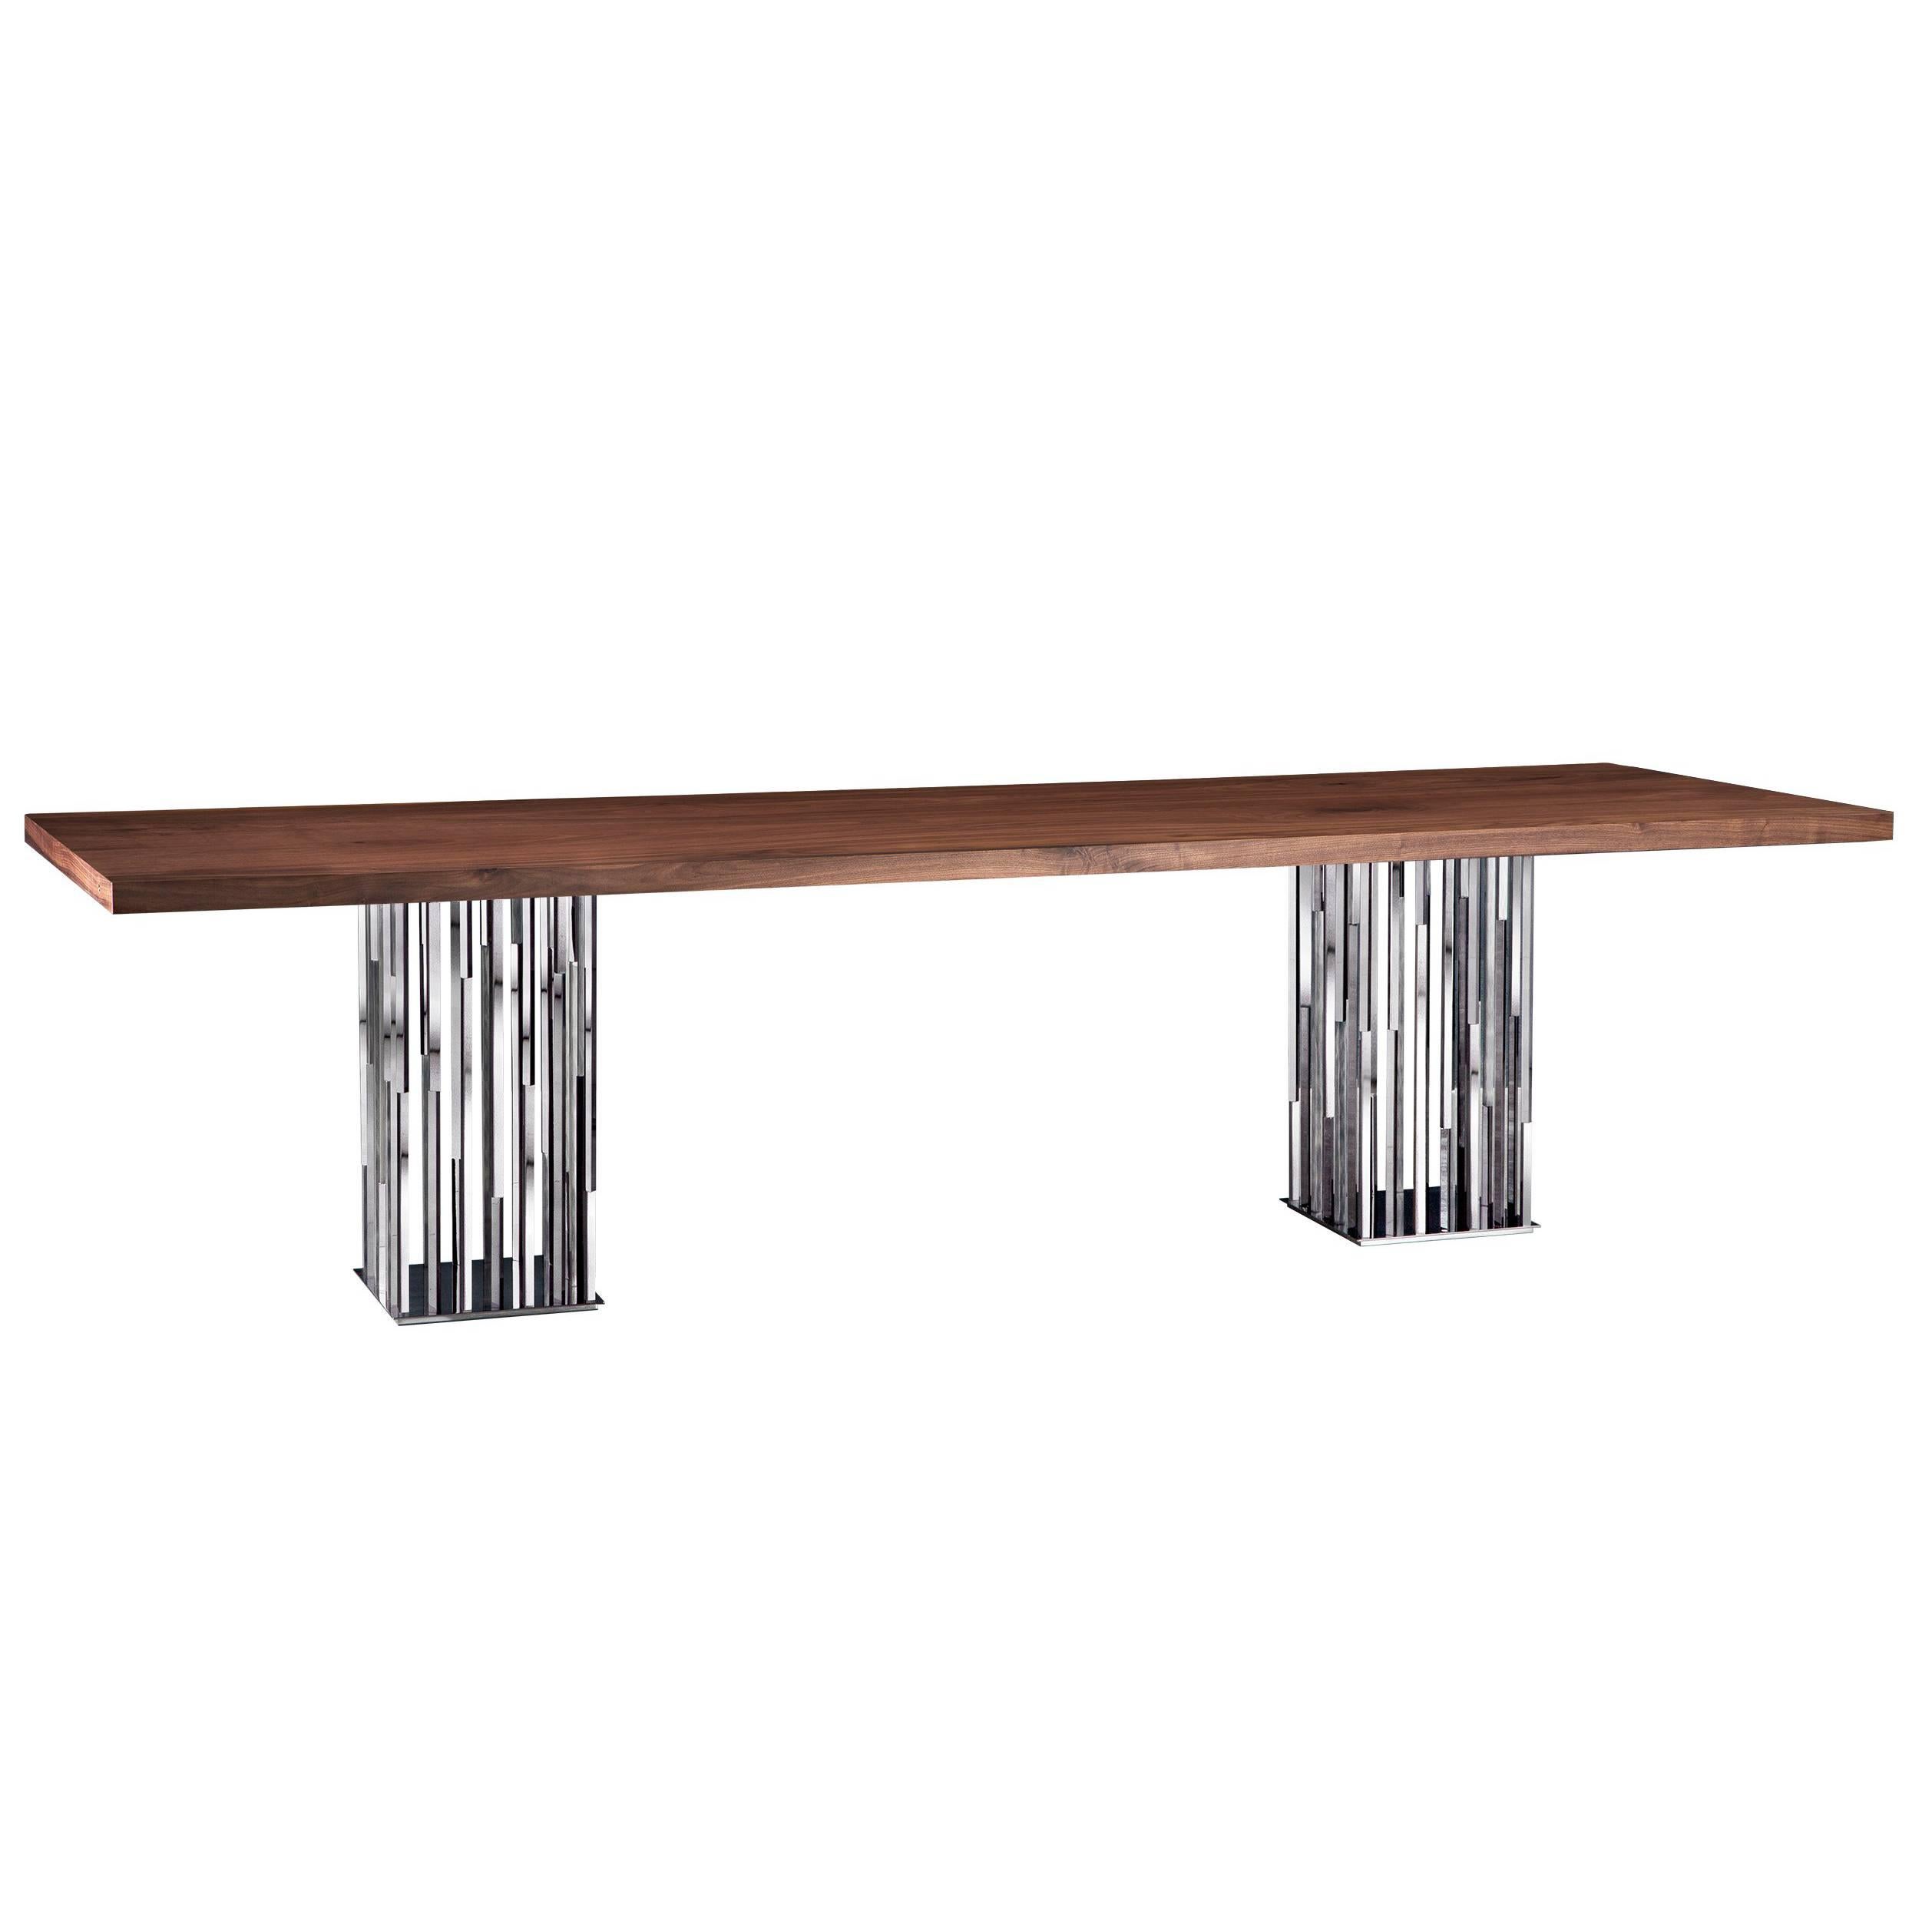 "Il Pezzo 9 Table" contemporary design solid walnut table with nickel base